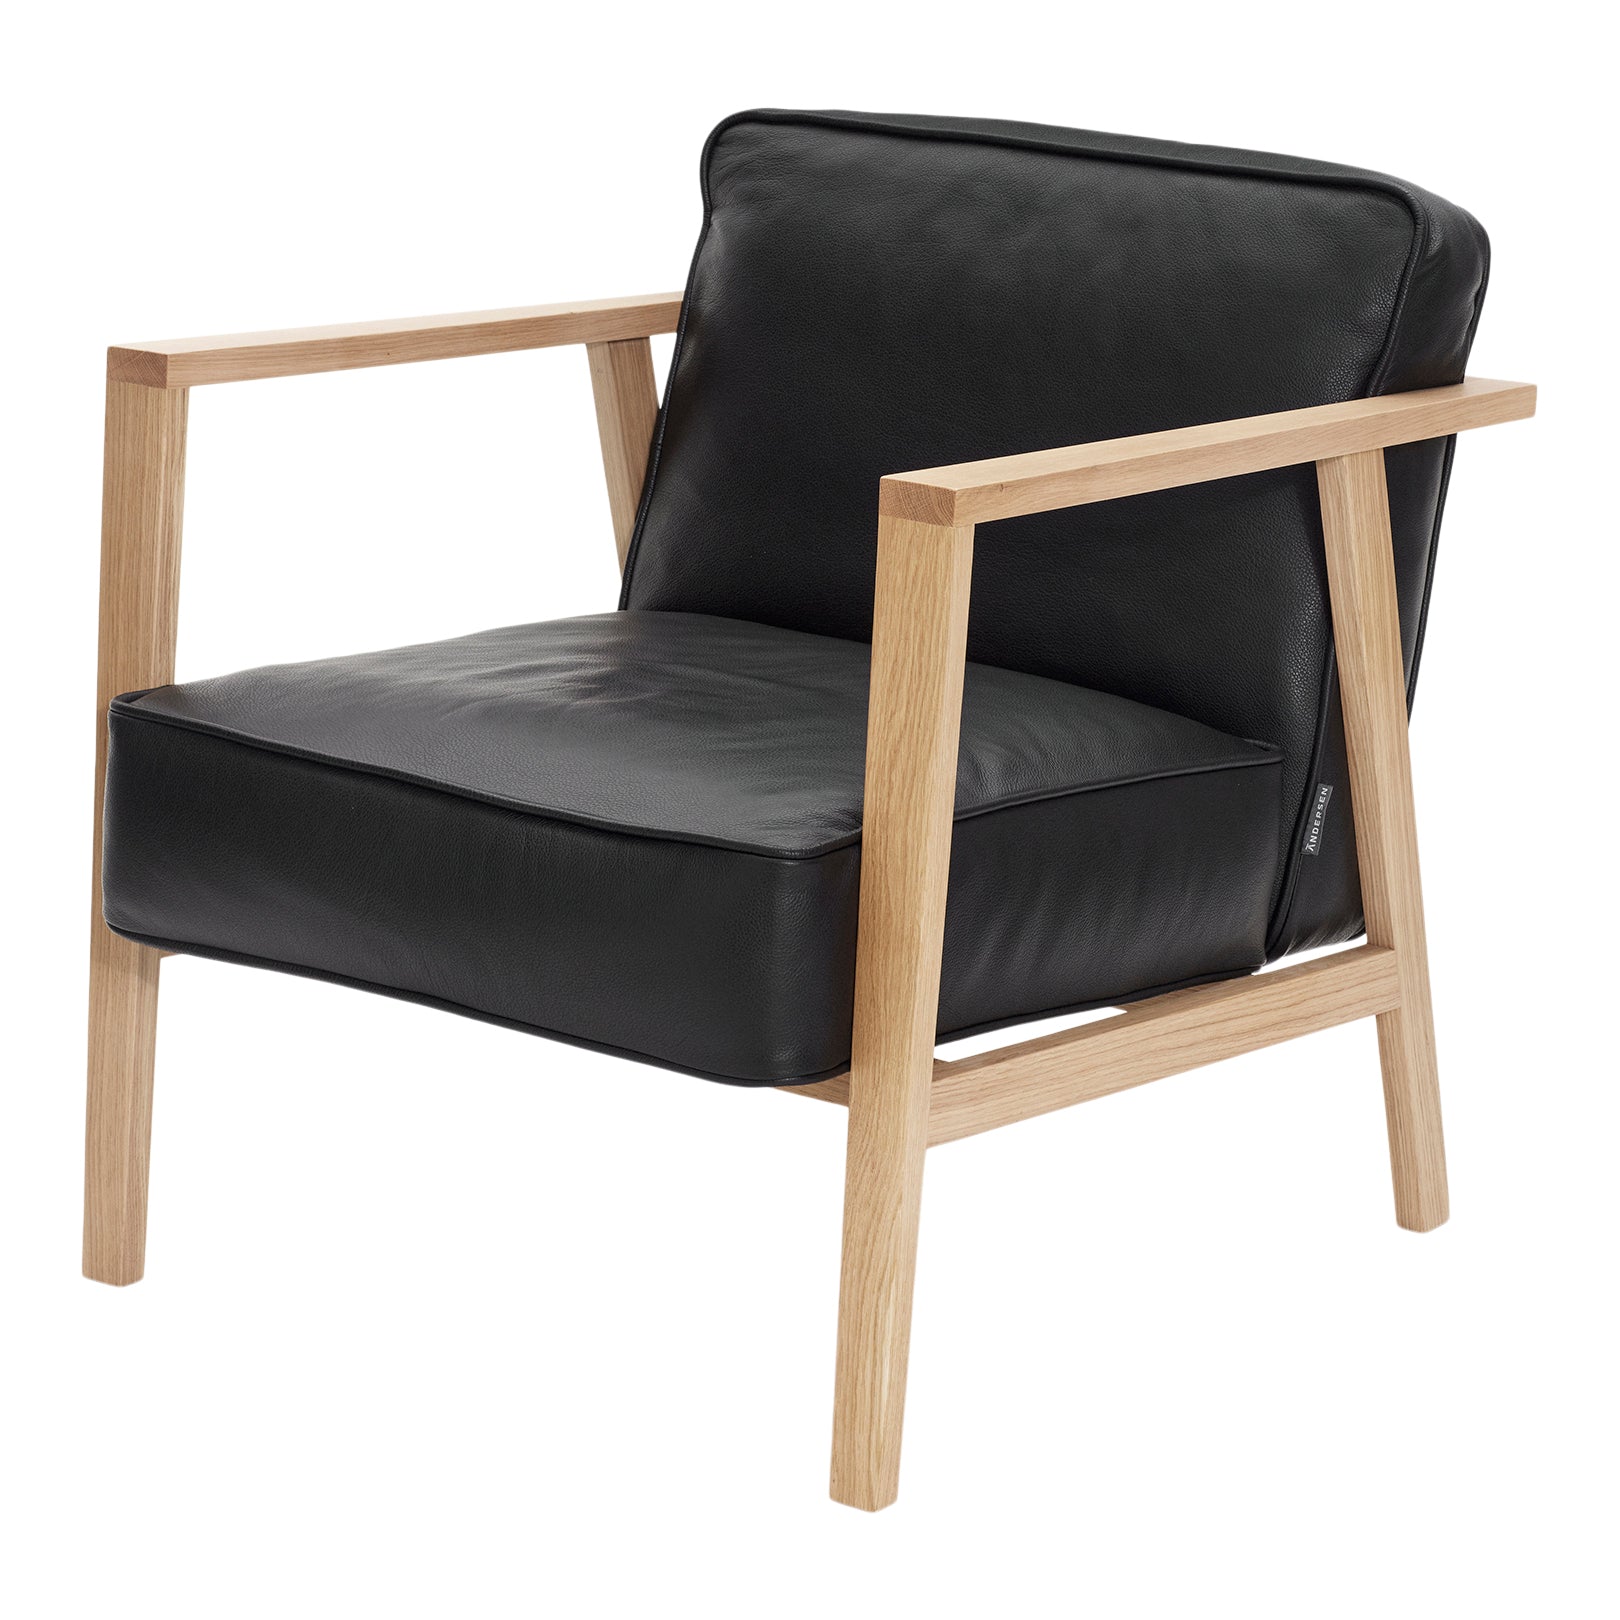 Andersen Furniture - LC1 Lounge chair - black leather/frame in oak